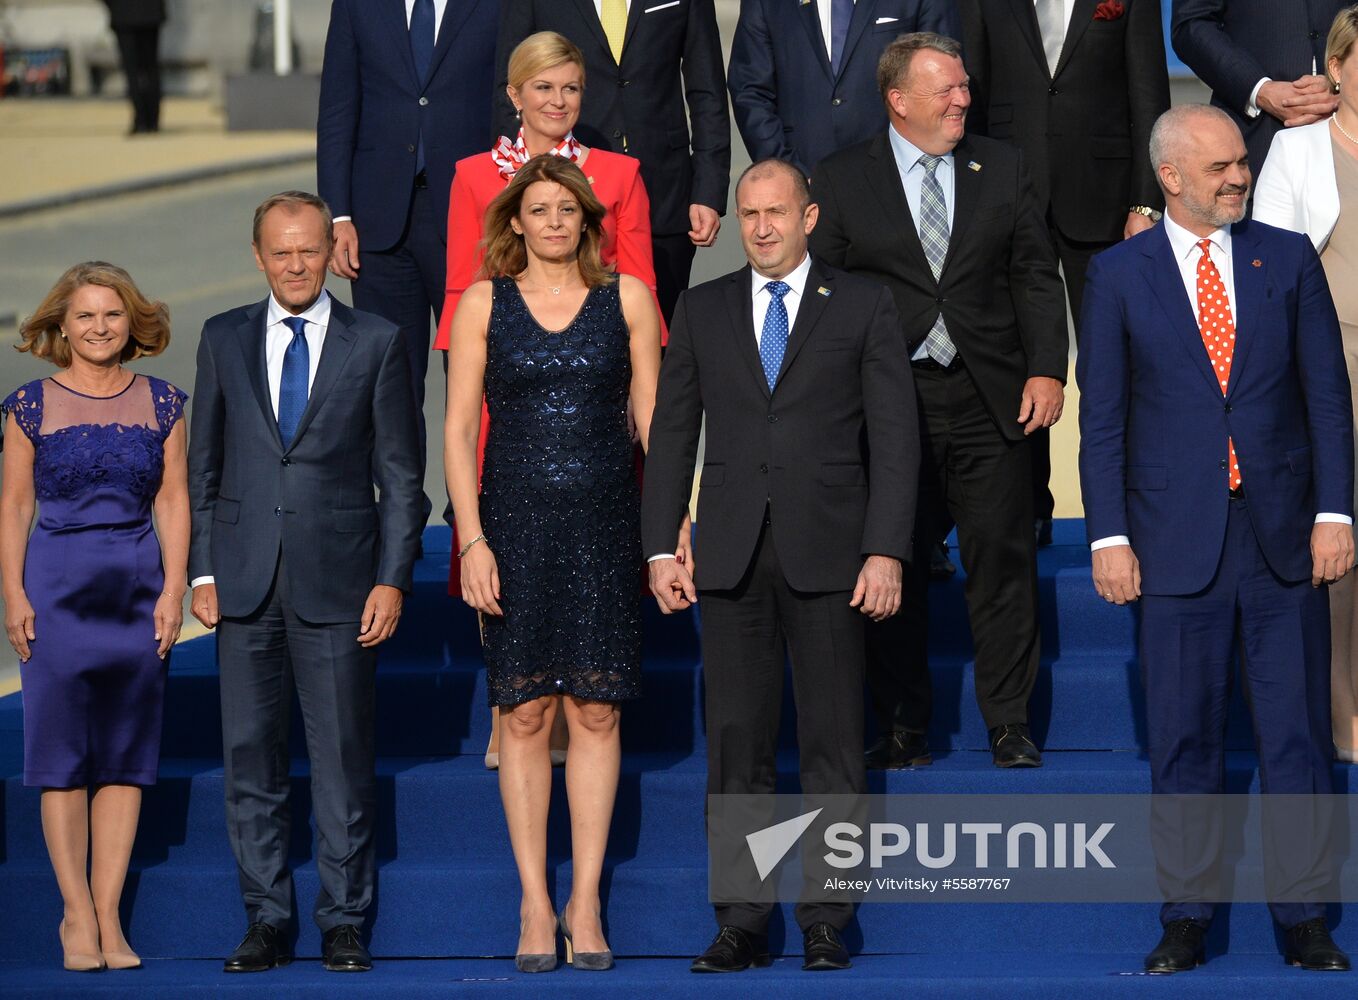 NATO Summit in Brussels. Day one